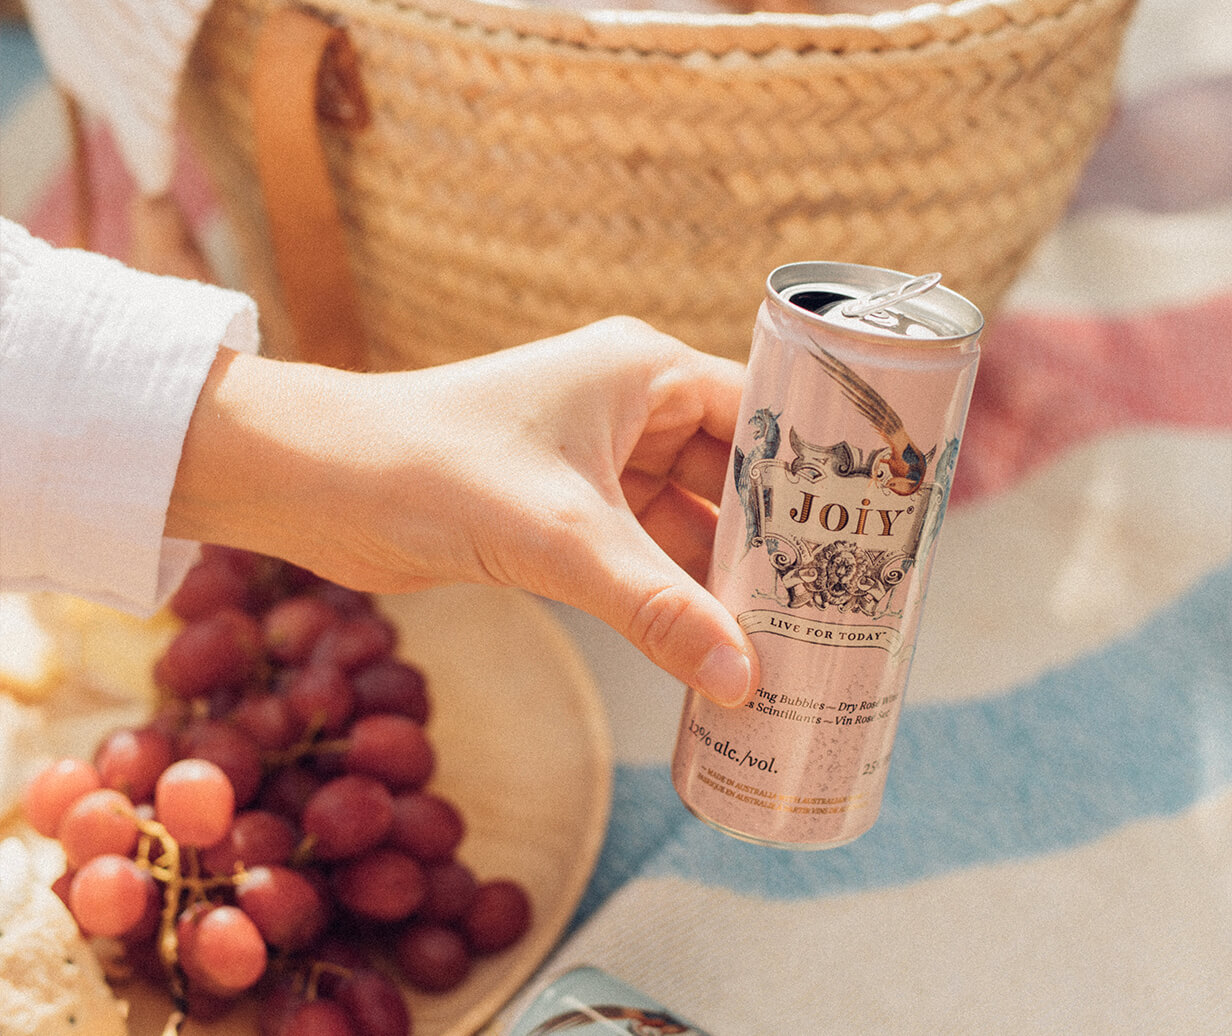 Joiy Canned Wine - Sparkling Rose